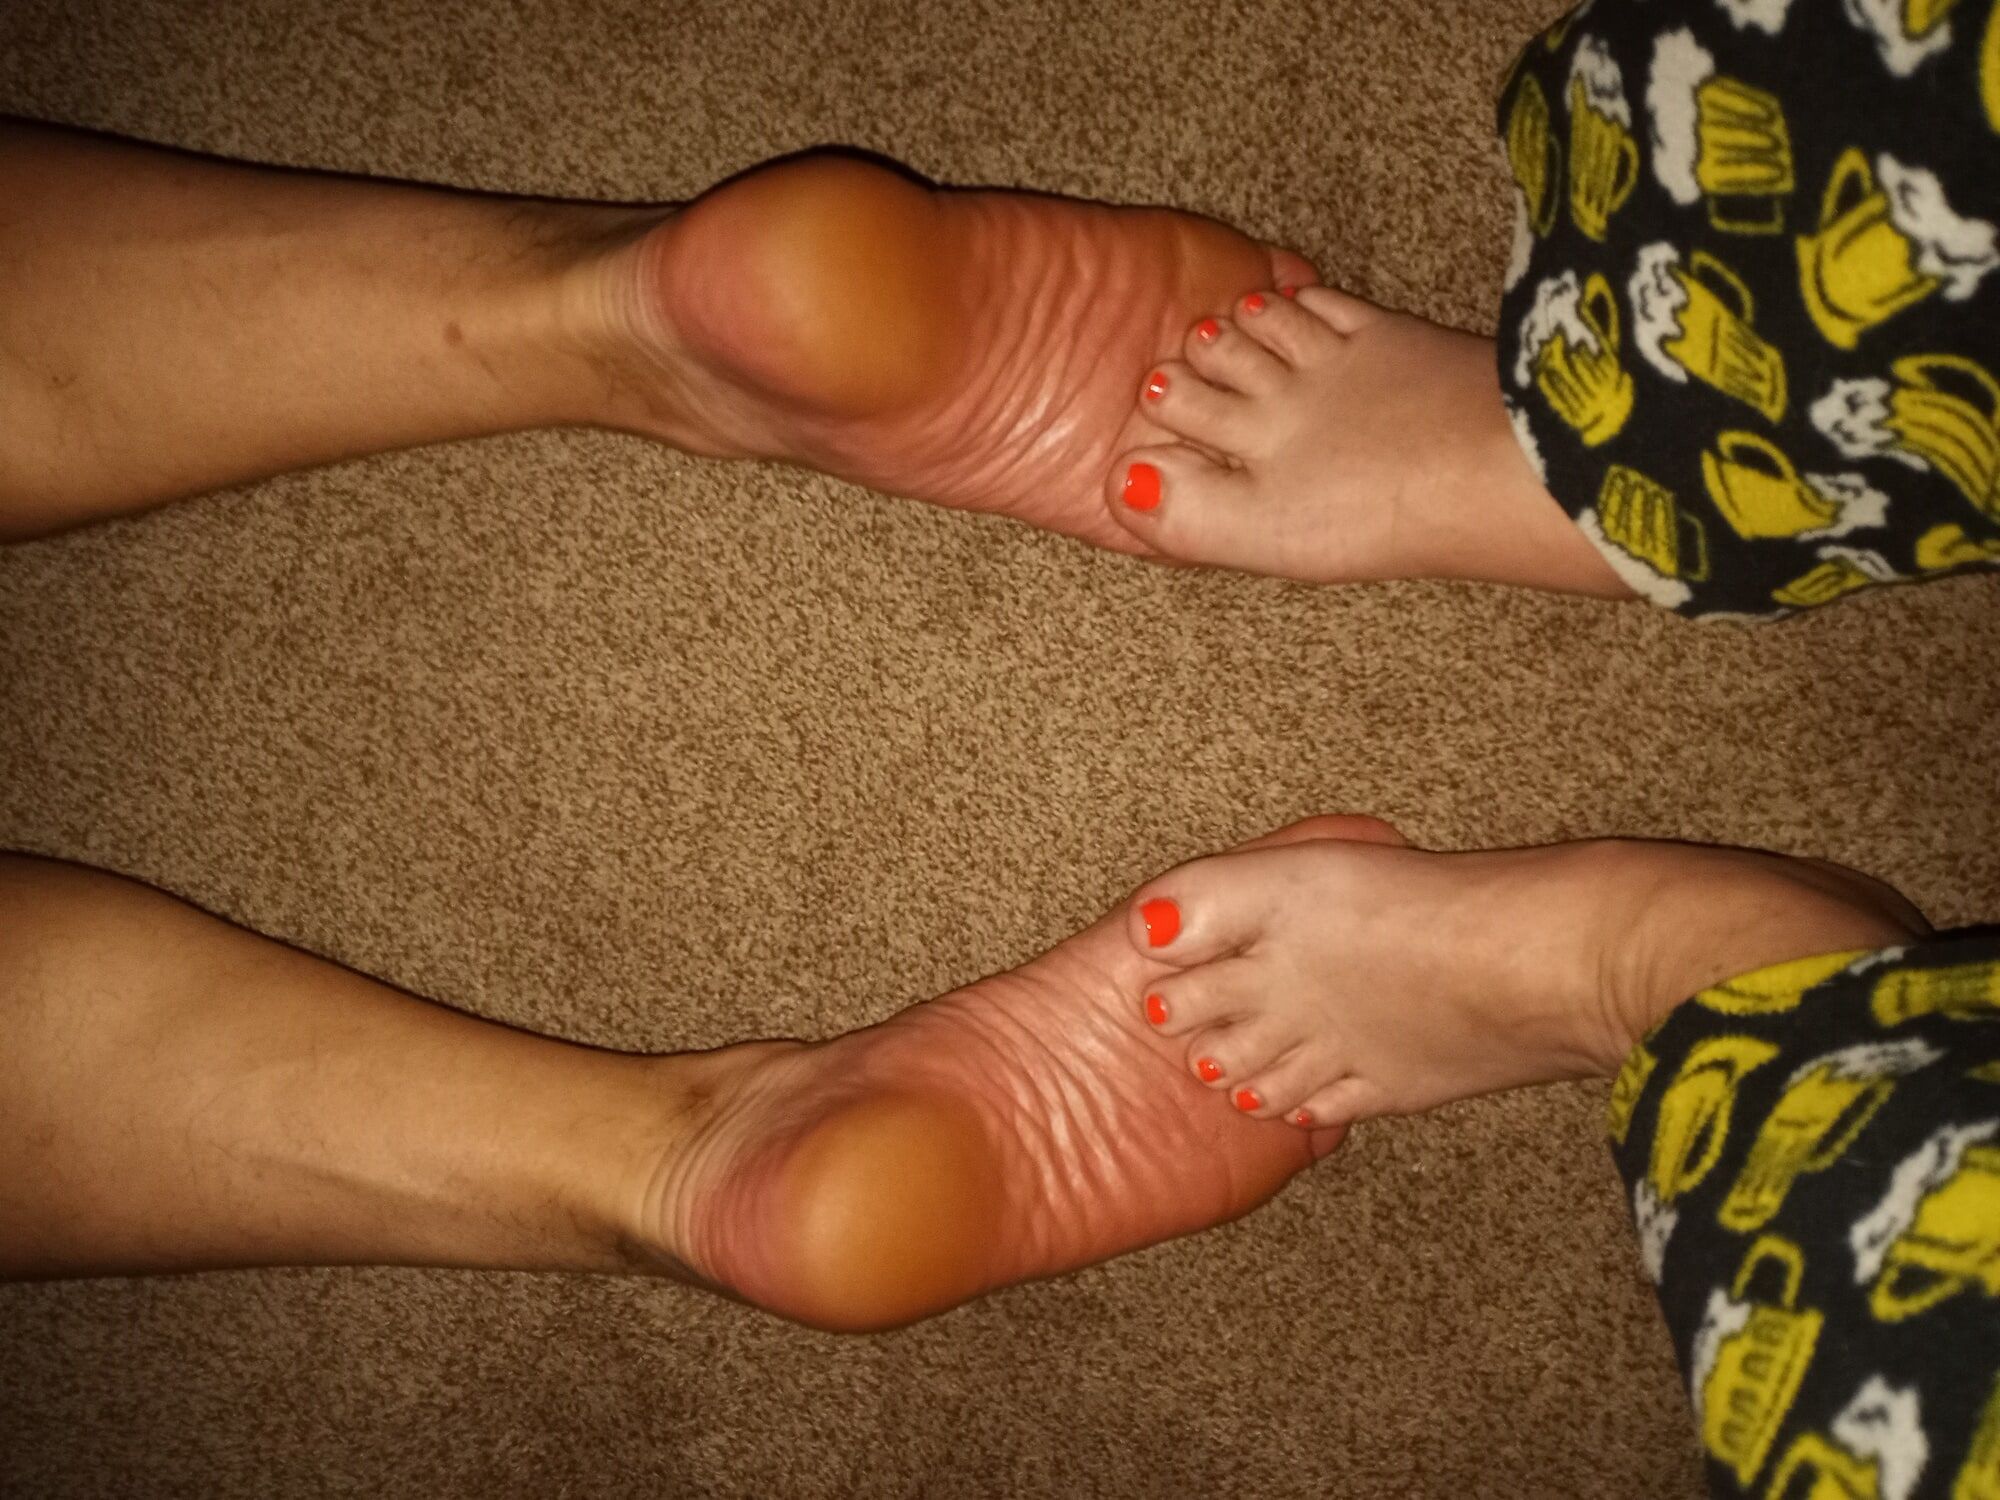 Showing our toes off